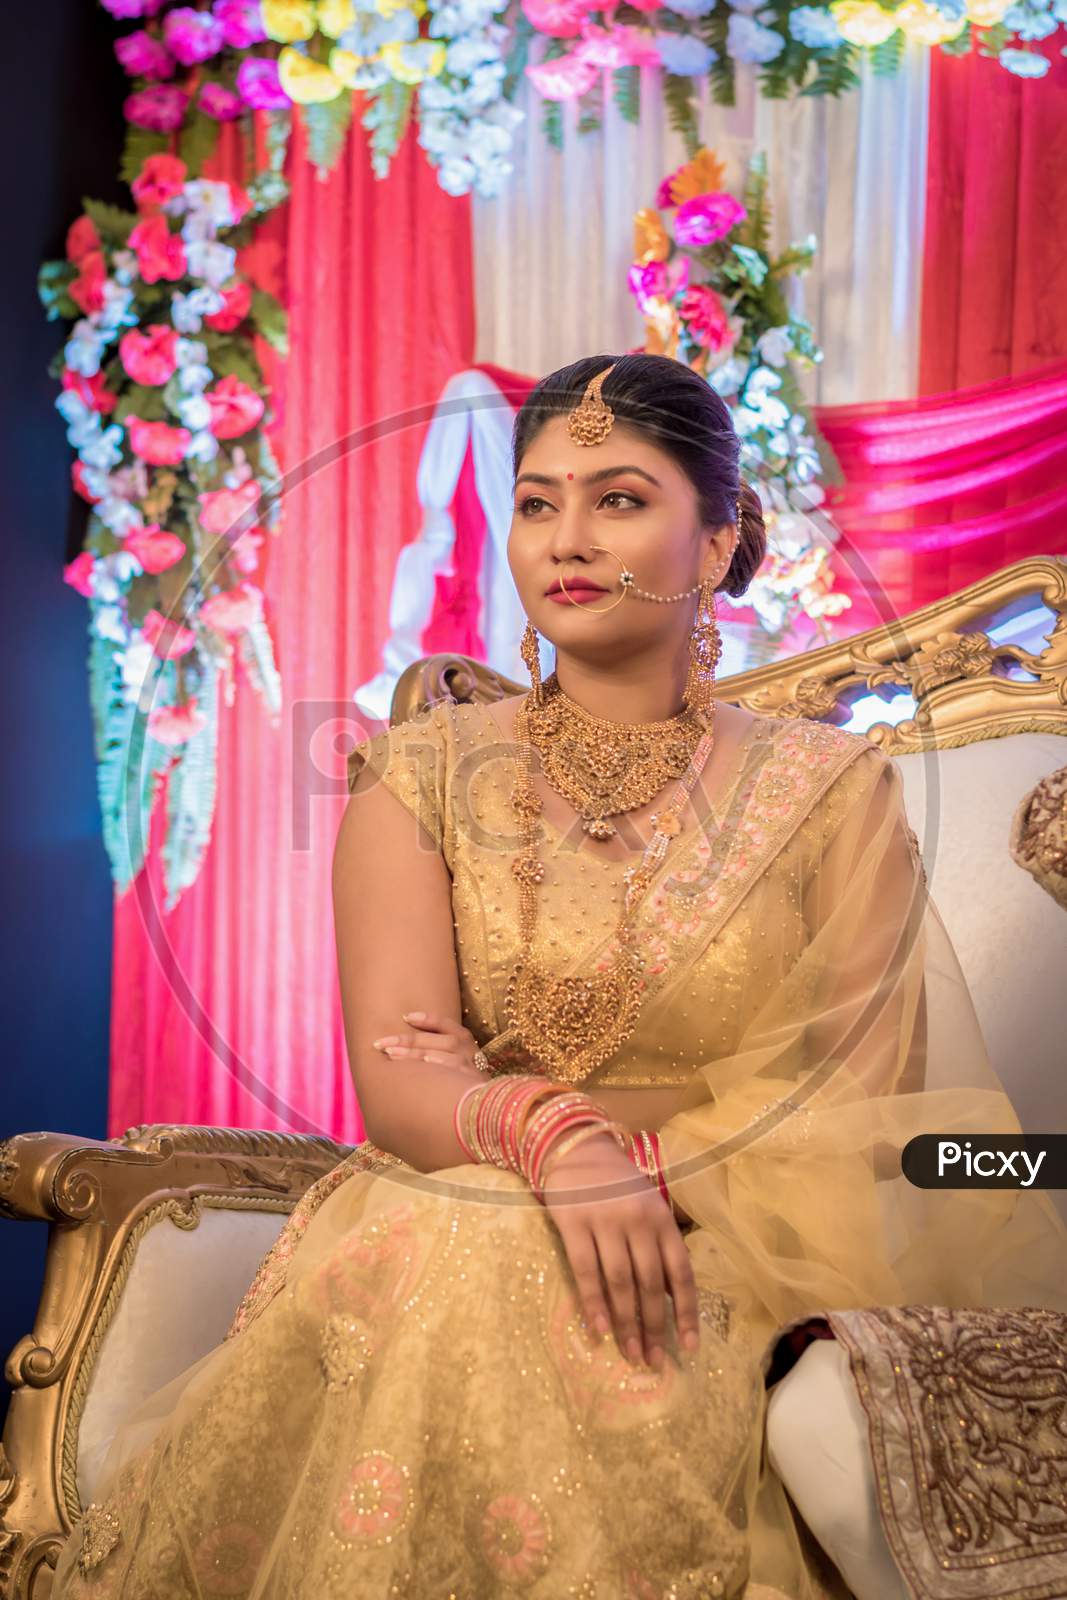 August 2019, Kolkata, India: Portrait Of An Indian Bride Standing With Glamorous Outfit And Jewellery With Makeup In A Banquet Hall. Traditional Indian Bride In Wedding